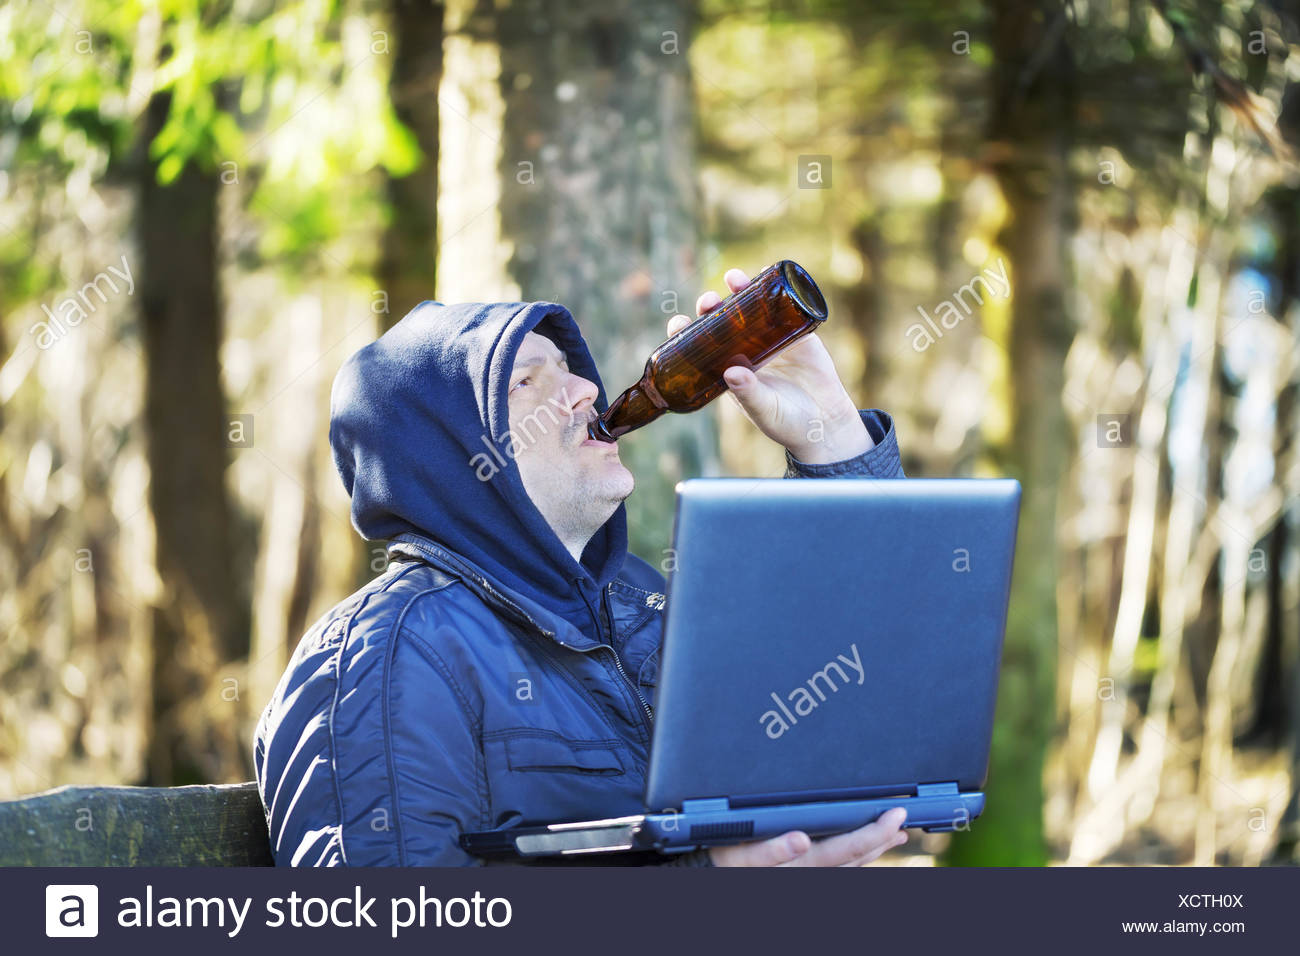 man-with-beer-bottle-and-pc-in-the-park-XCTH0X.jpg